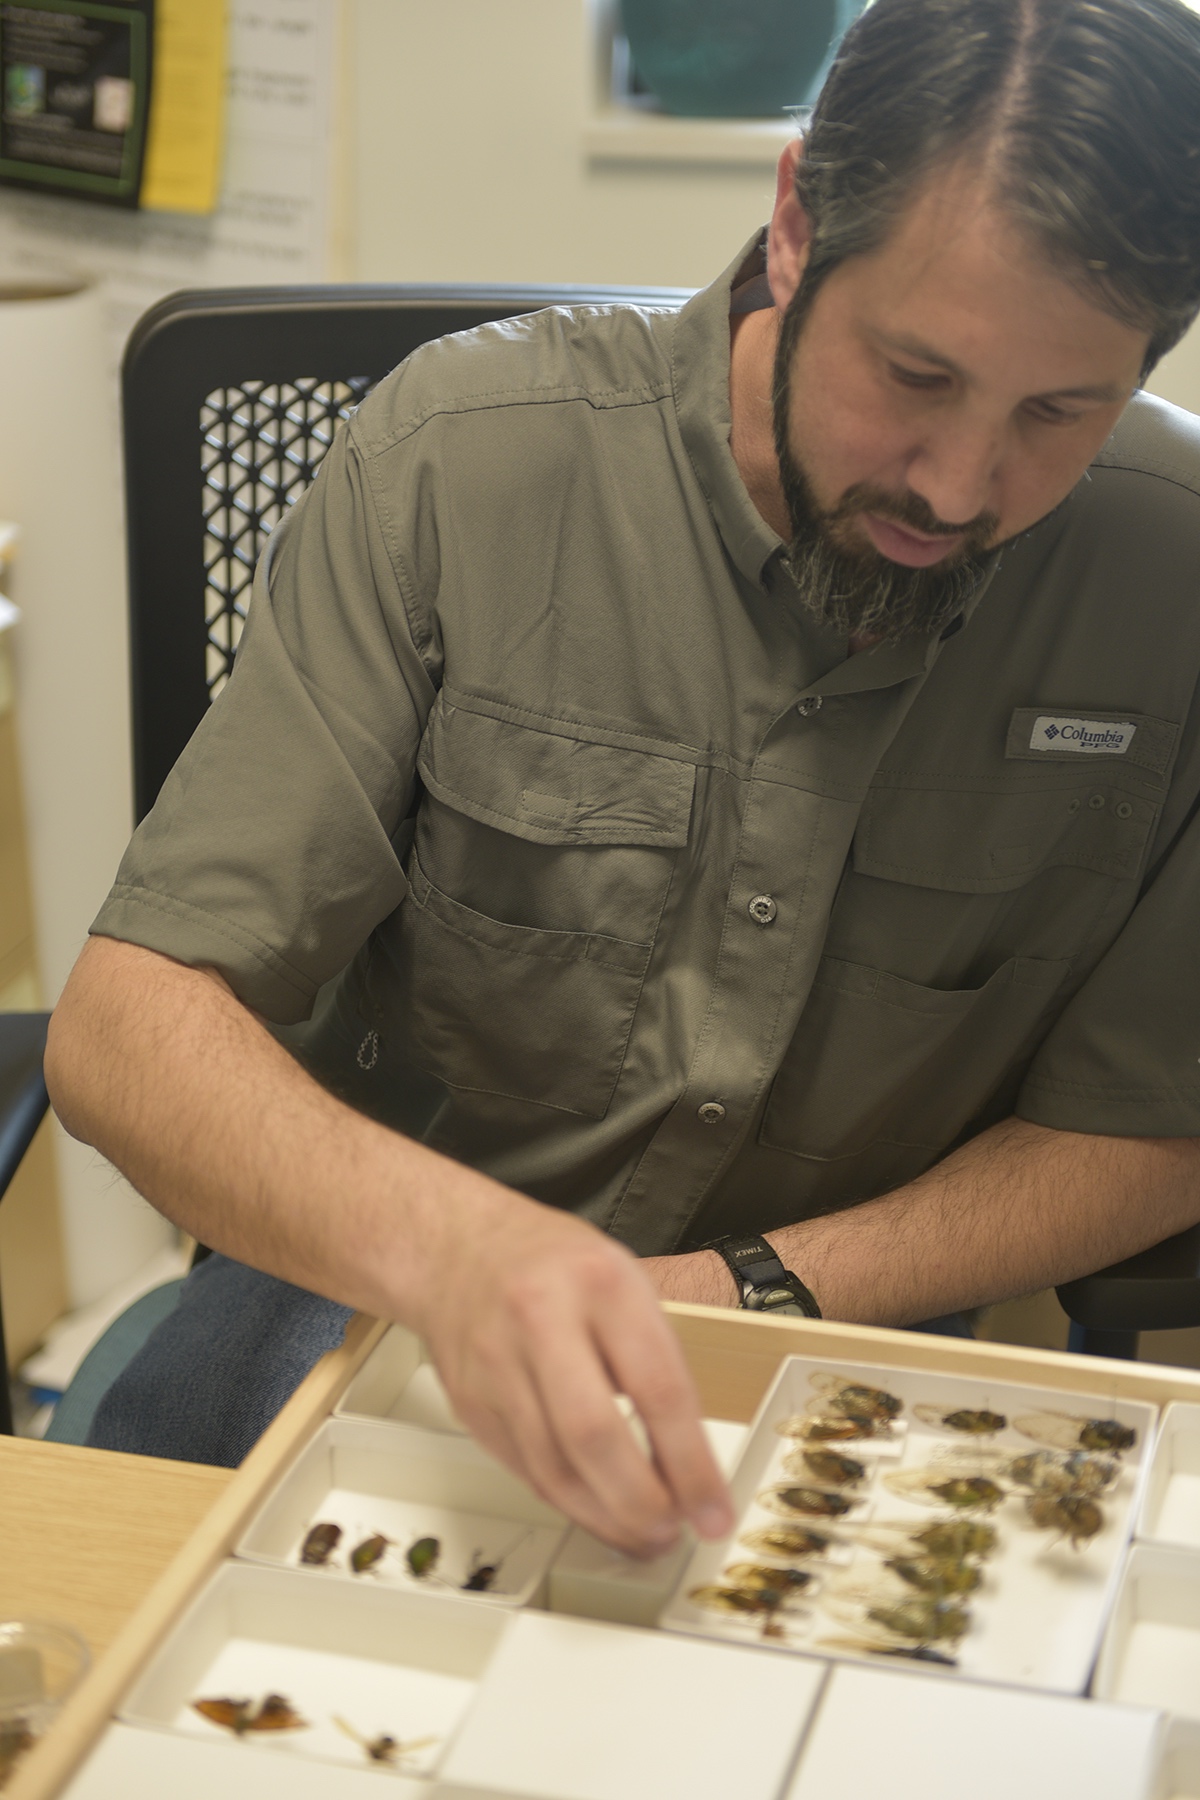 Dr. Bruce Snyder with his collection of annual and periodical cicada specimens.